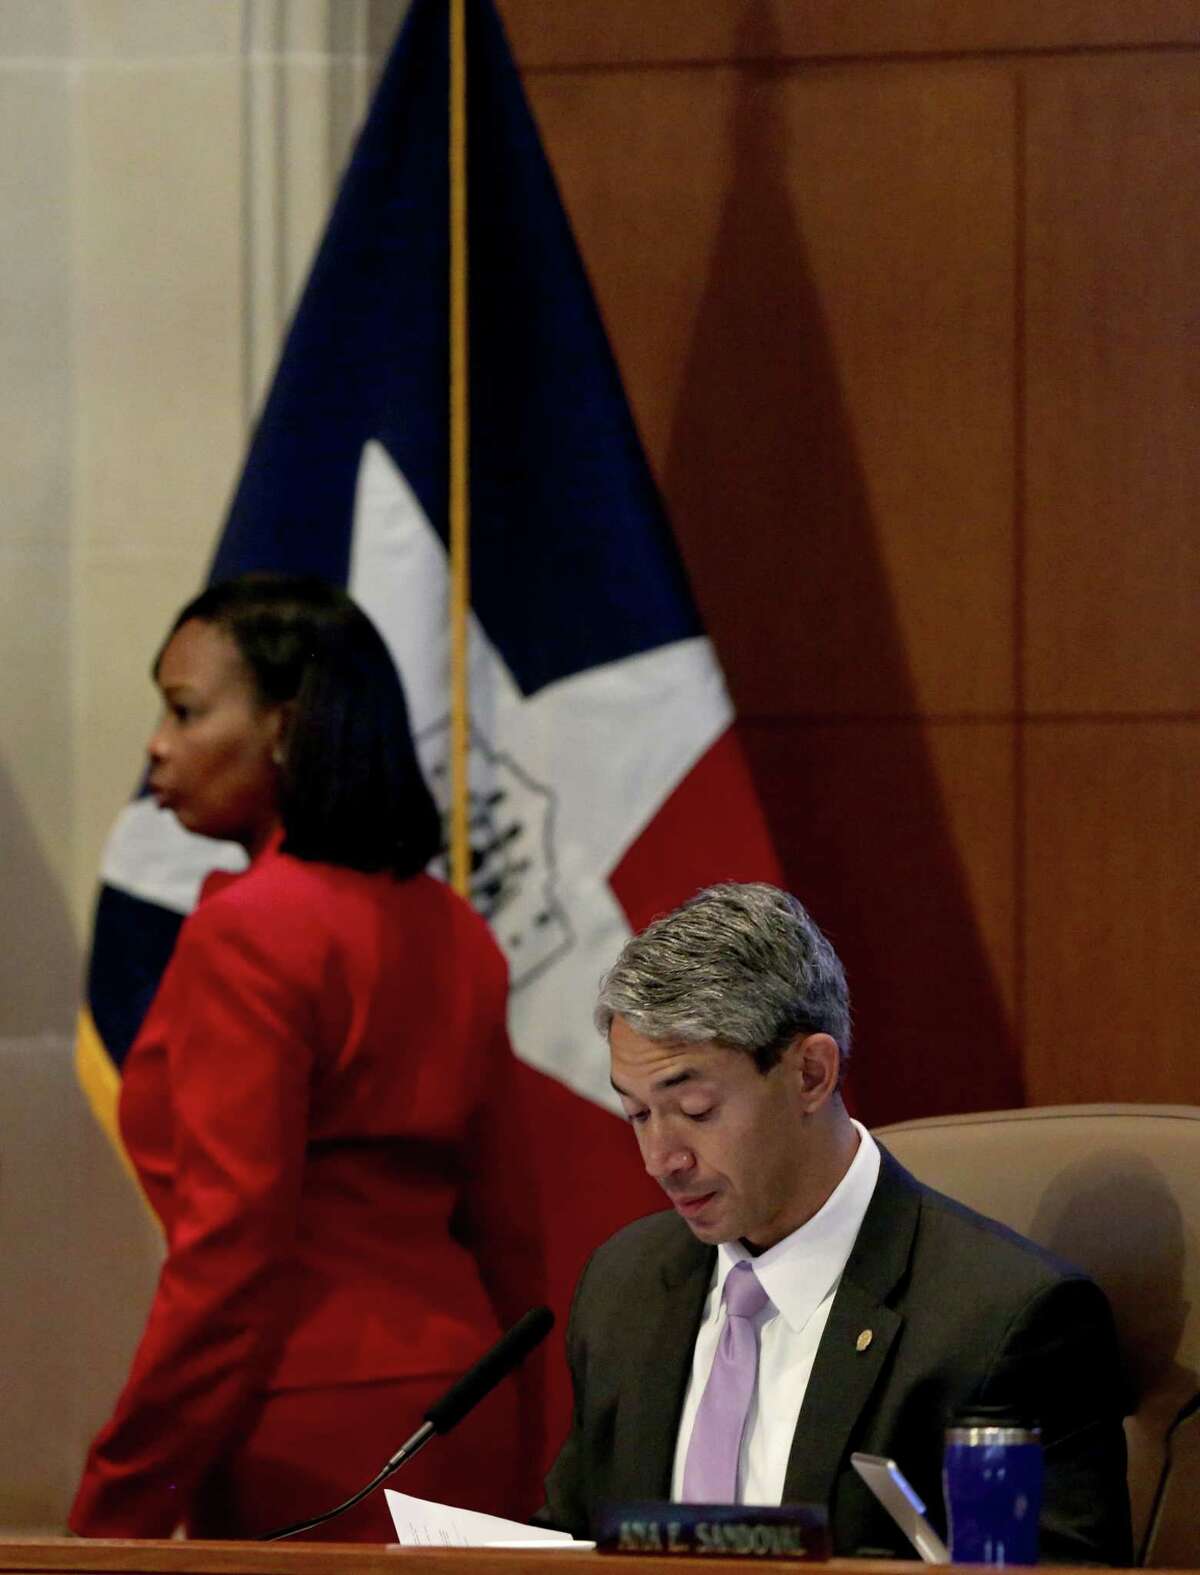 Mayor elect Ron Nirenberg, prepares for the last city council A session under Mayor Ivy Taylor, background, on Thursday, June 15, 2017. Reportedly, Taylor has not talked to Nirenberg since his mayoral victory at the poles last Saturday.